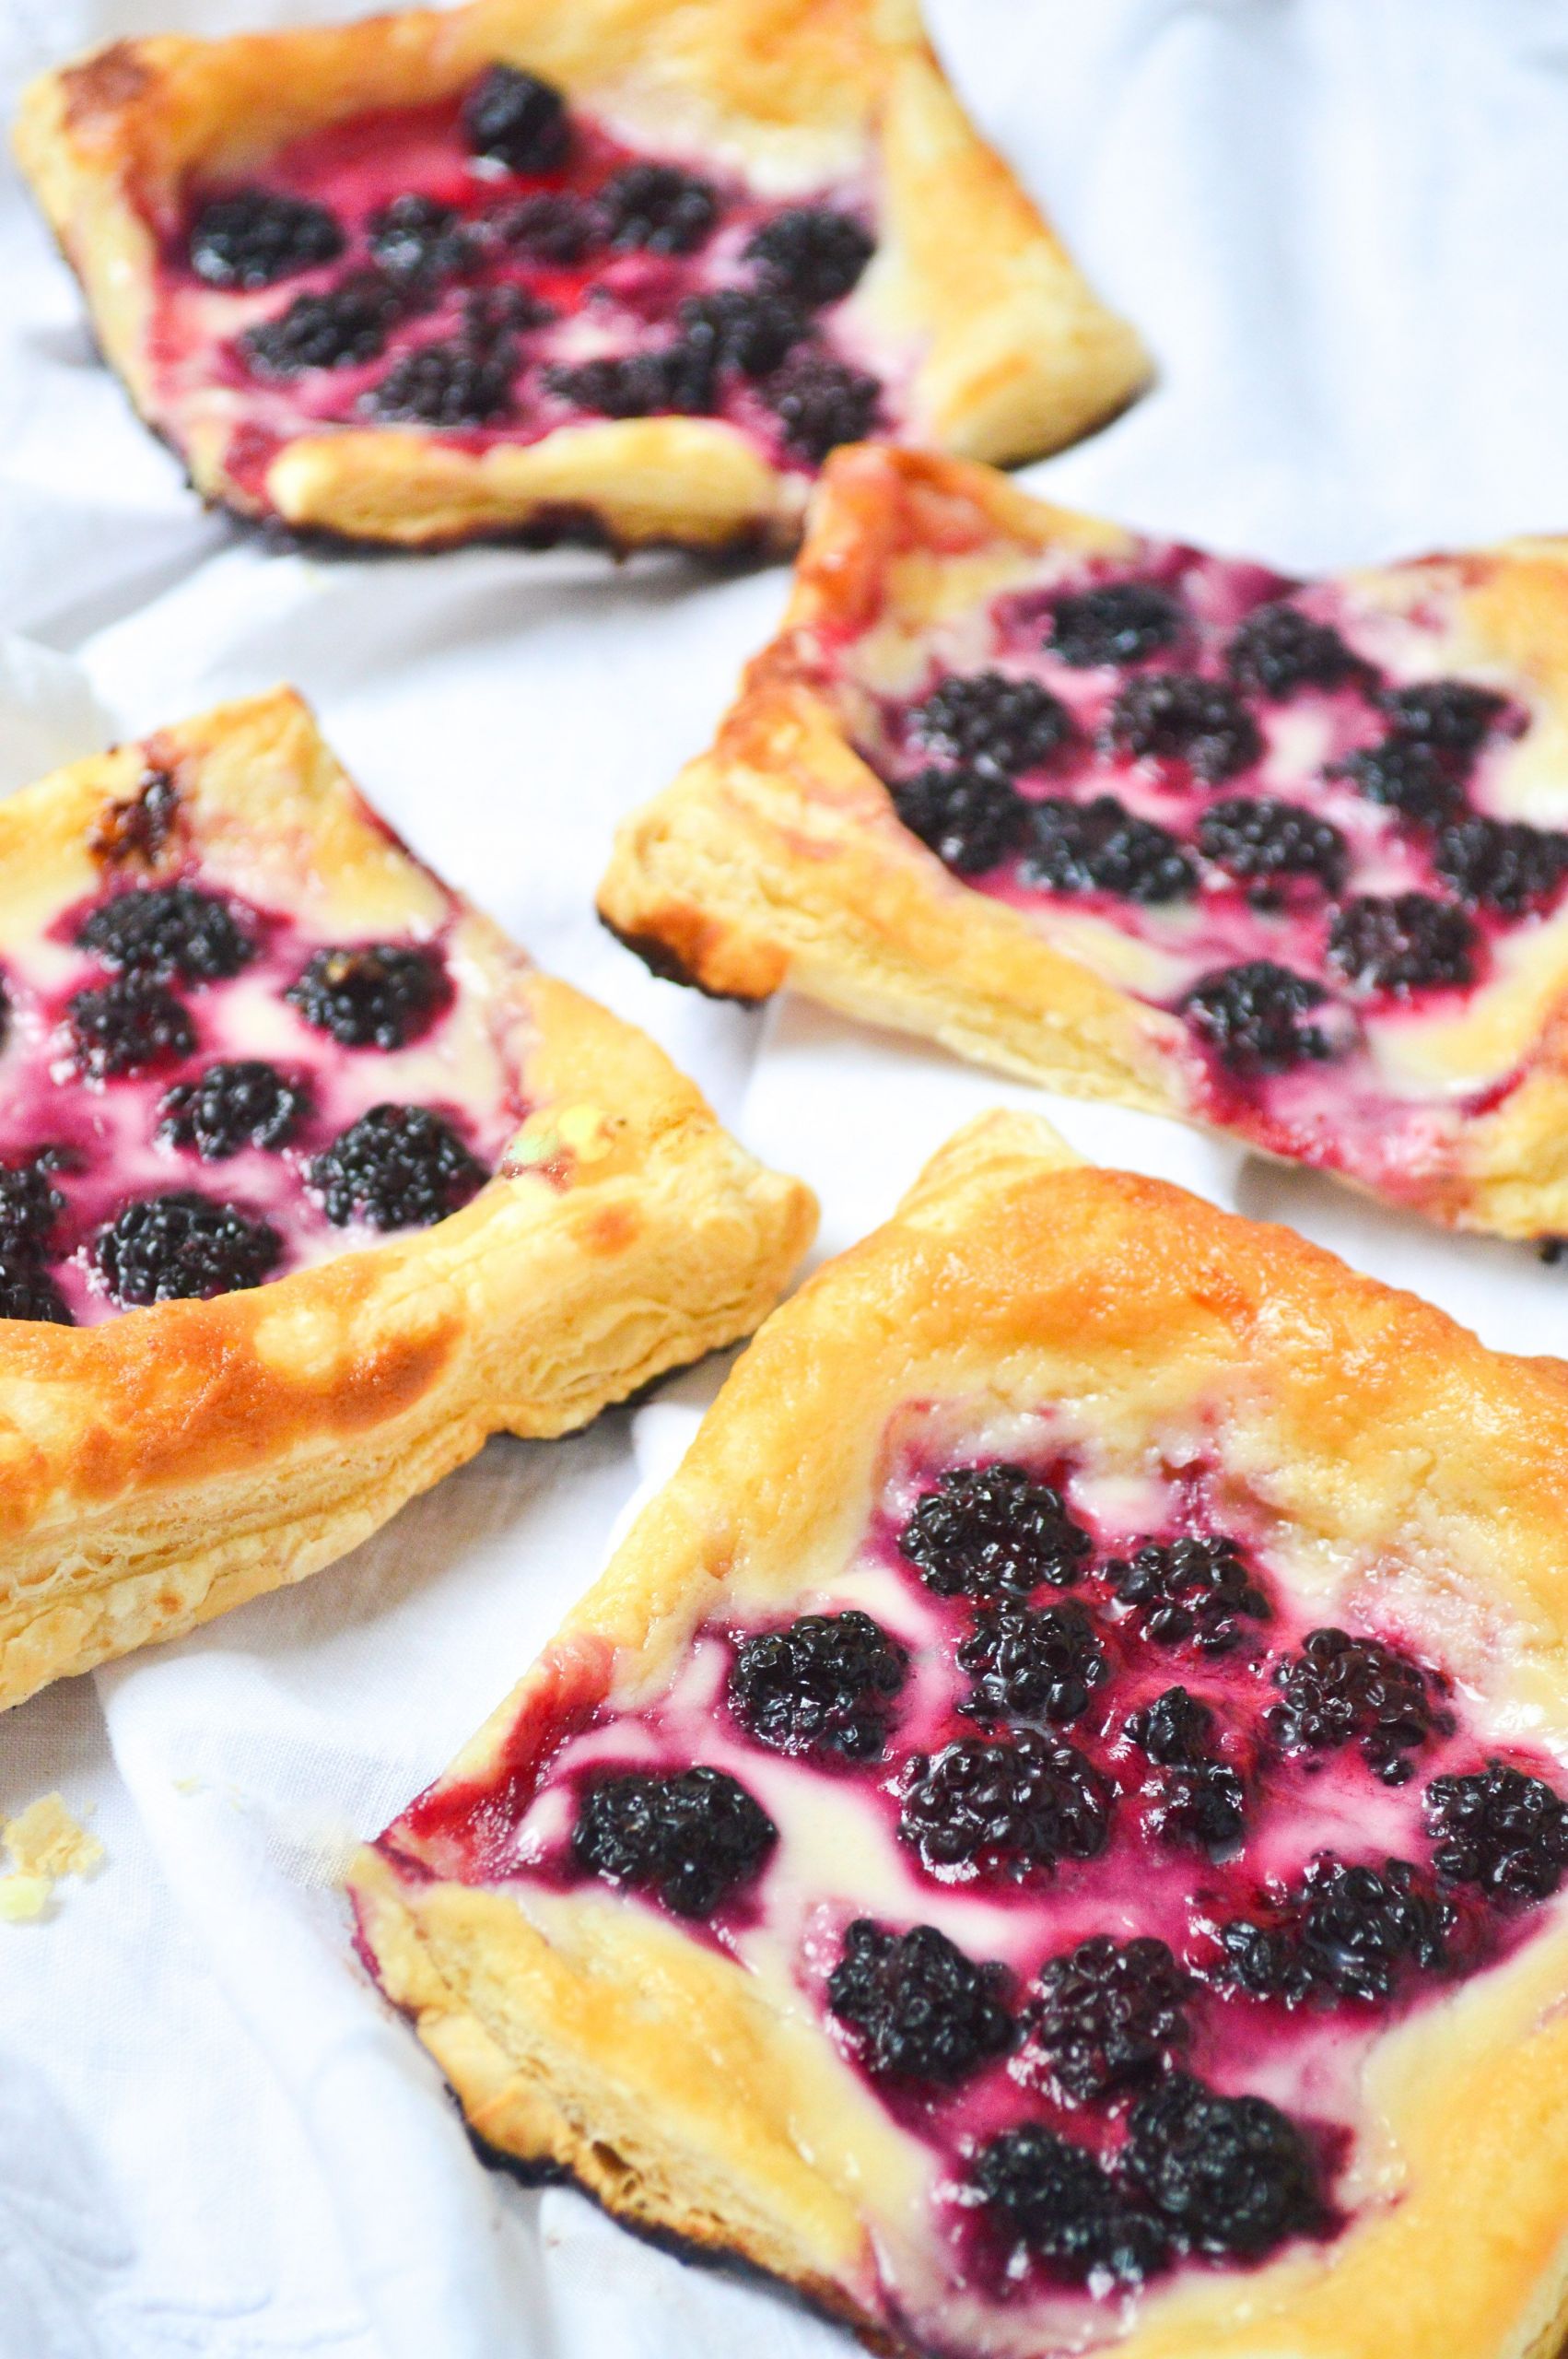 Puff Pastry Desserts With Cream Cheese
 Blackberry Cream Cheese Pastries Recipe